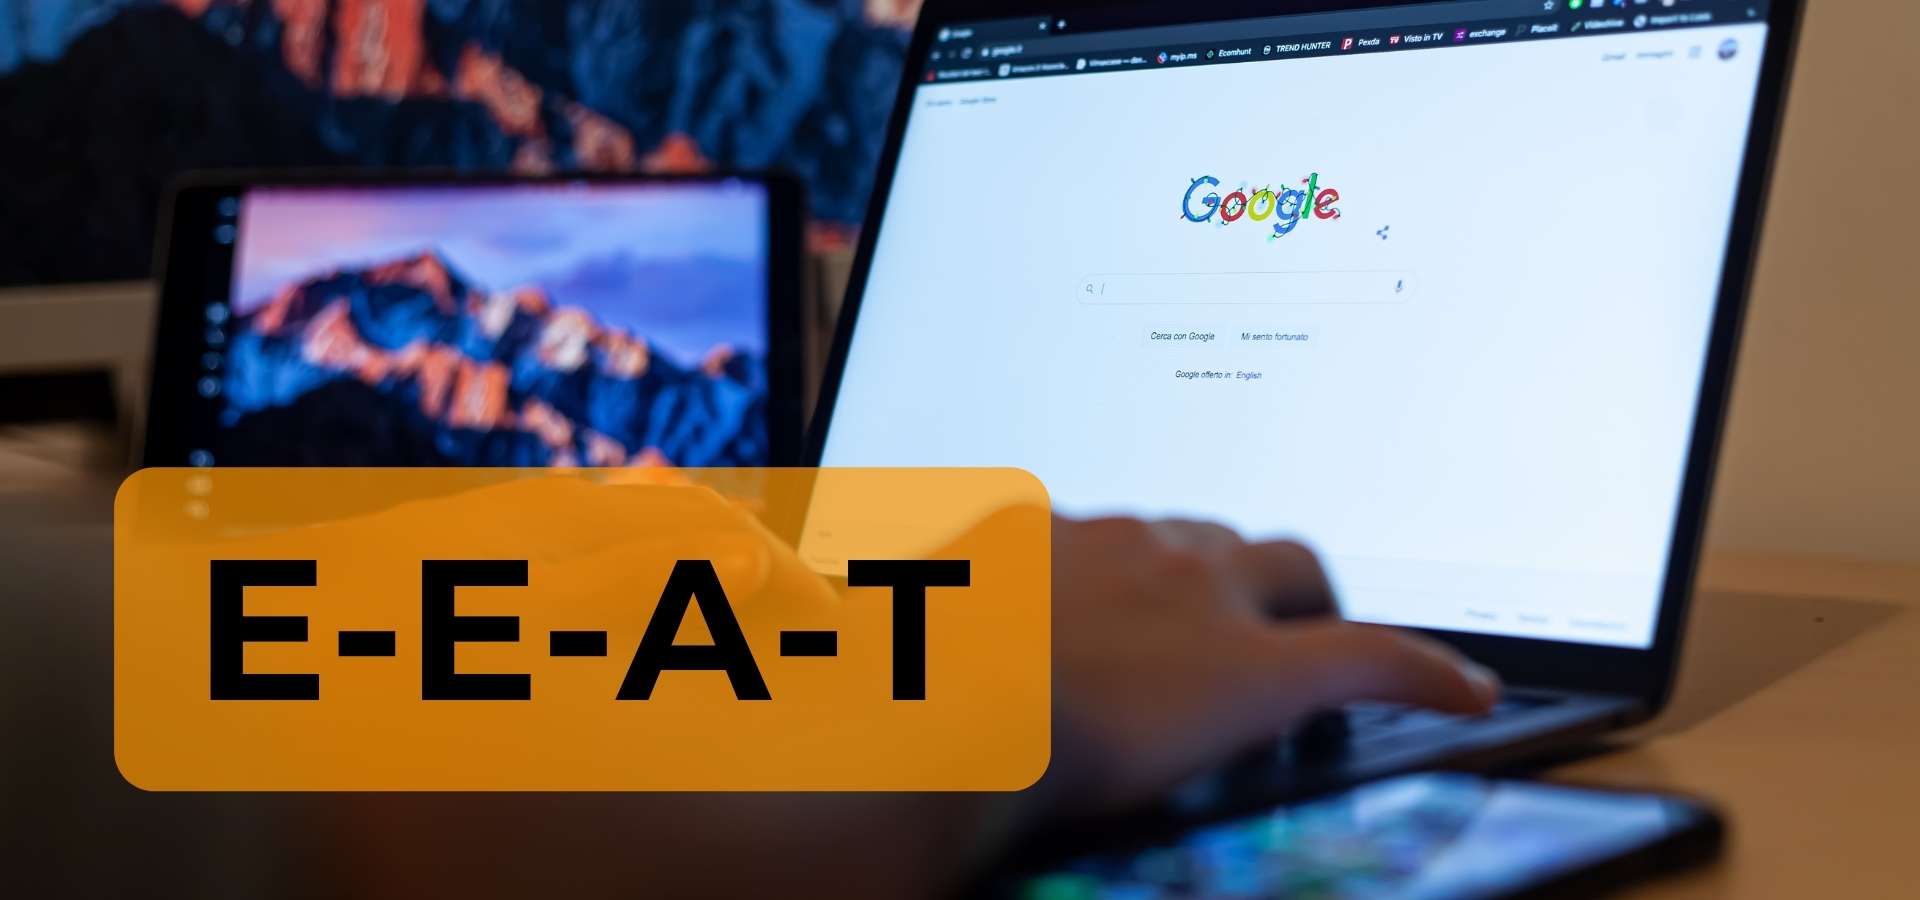 E-E-A-T stands for Experience, Expertise, Authoritativeness, and Trustworthiness. It is a framework used by Google to assess the quality of content on websites